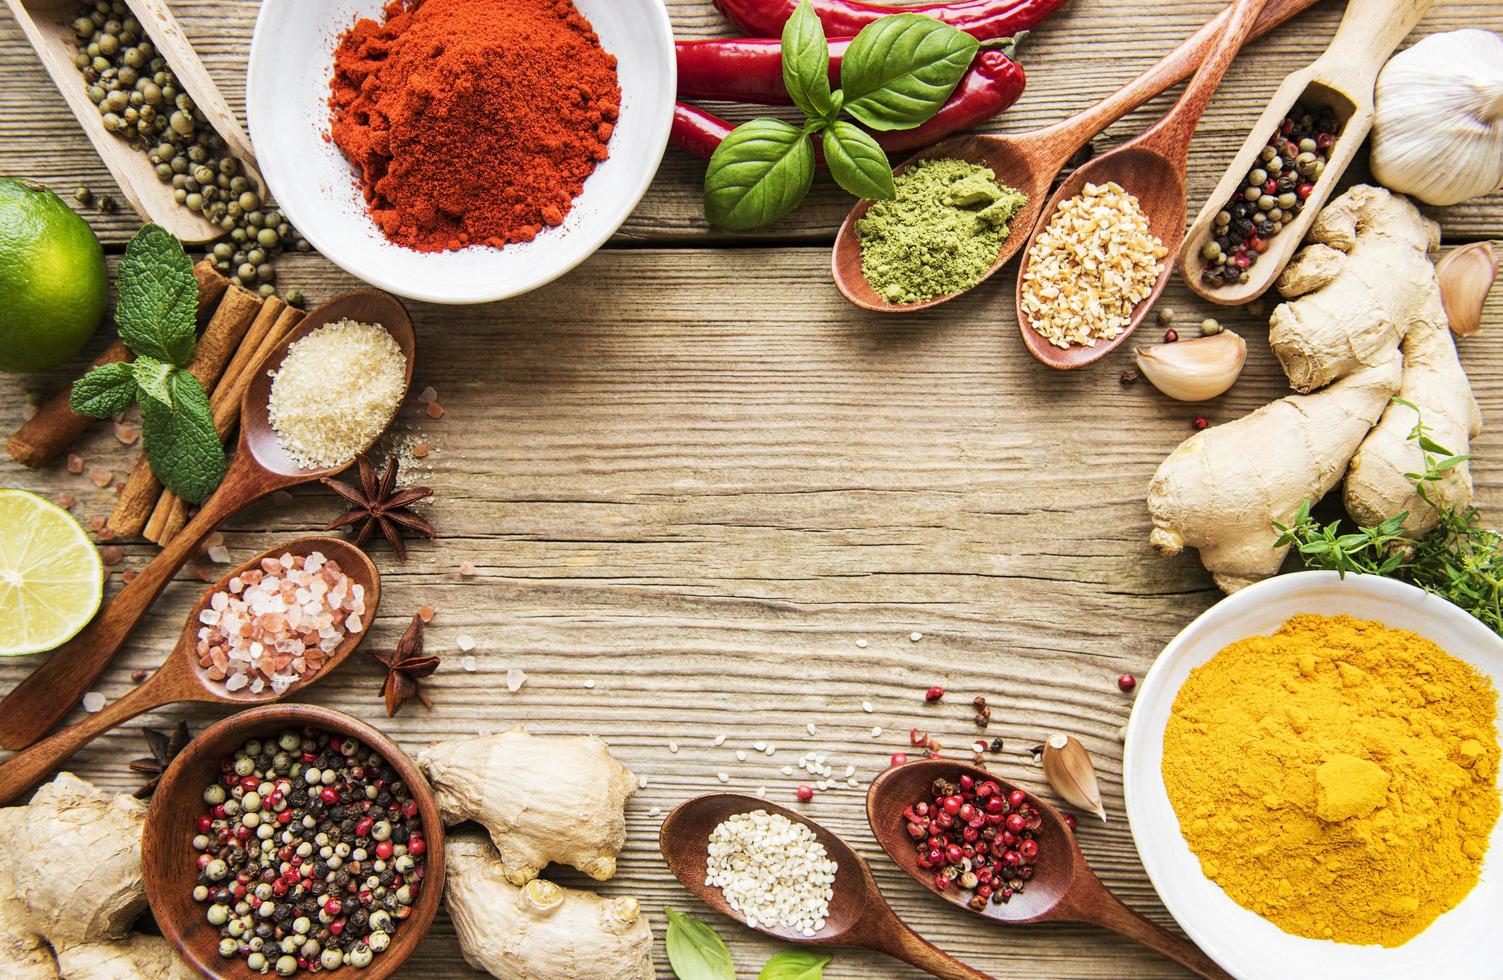 A selection of various colorful spices on a wooden table in bowls and spoons photo